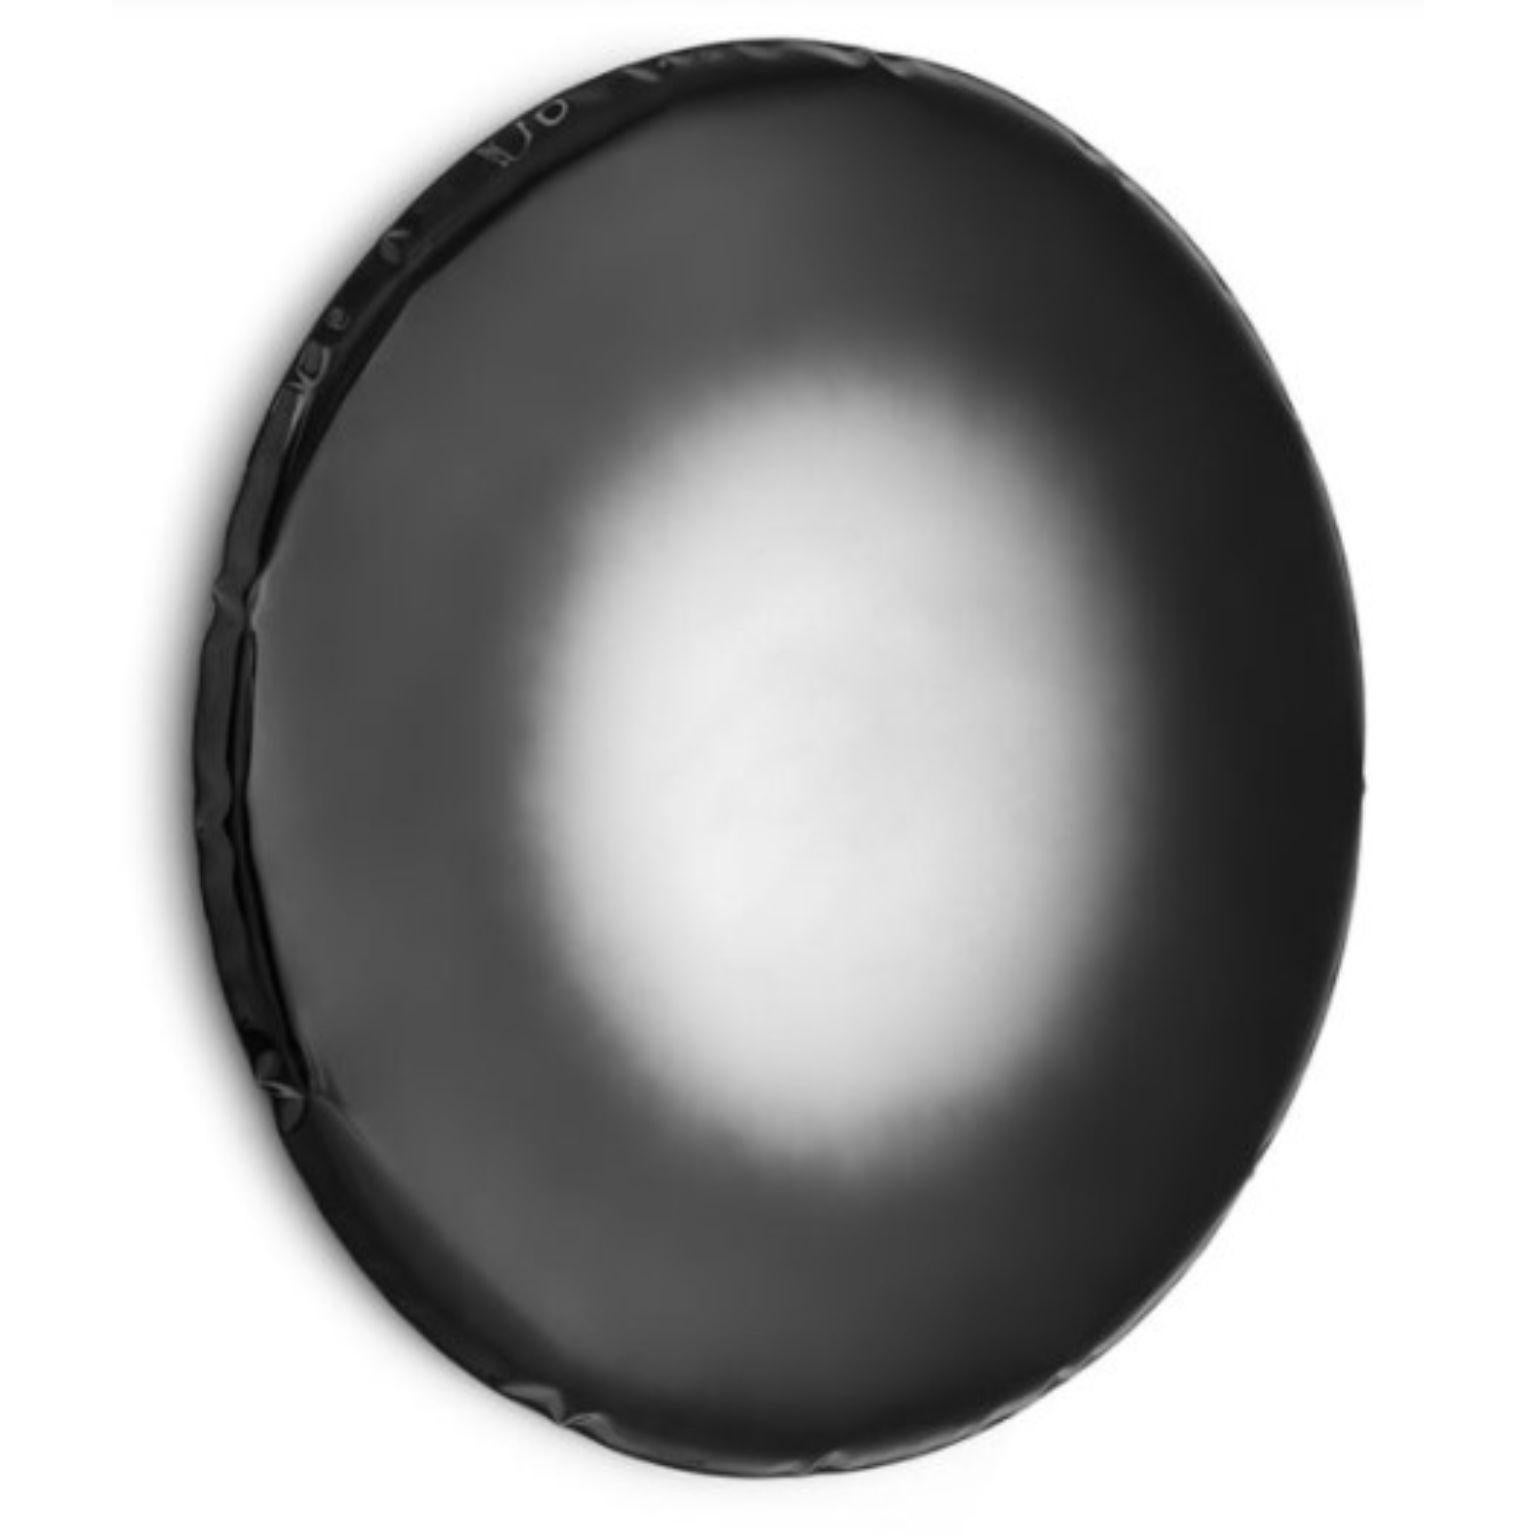 Dark Matter Oko 62 sculptural wall mirror by Zieta
Dimensions: Diameter 62 x D 6 cm 
Material: Stainless steel. 
Finish: Dark Matter.
Available in finishes: Stainless Steel, Deep Space Blue, Emerald, Sapphire, Sapphire/Emerald, Dark Matter, and Red